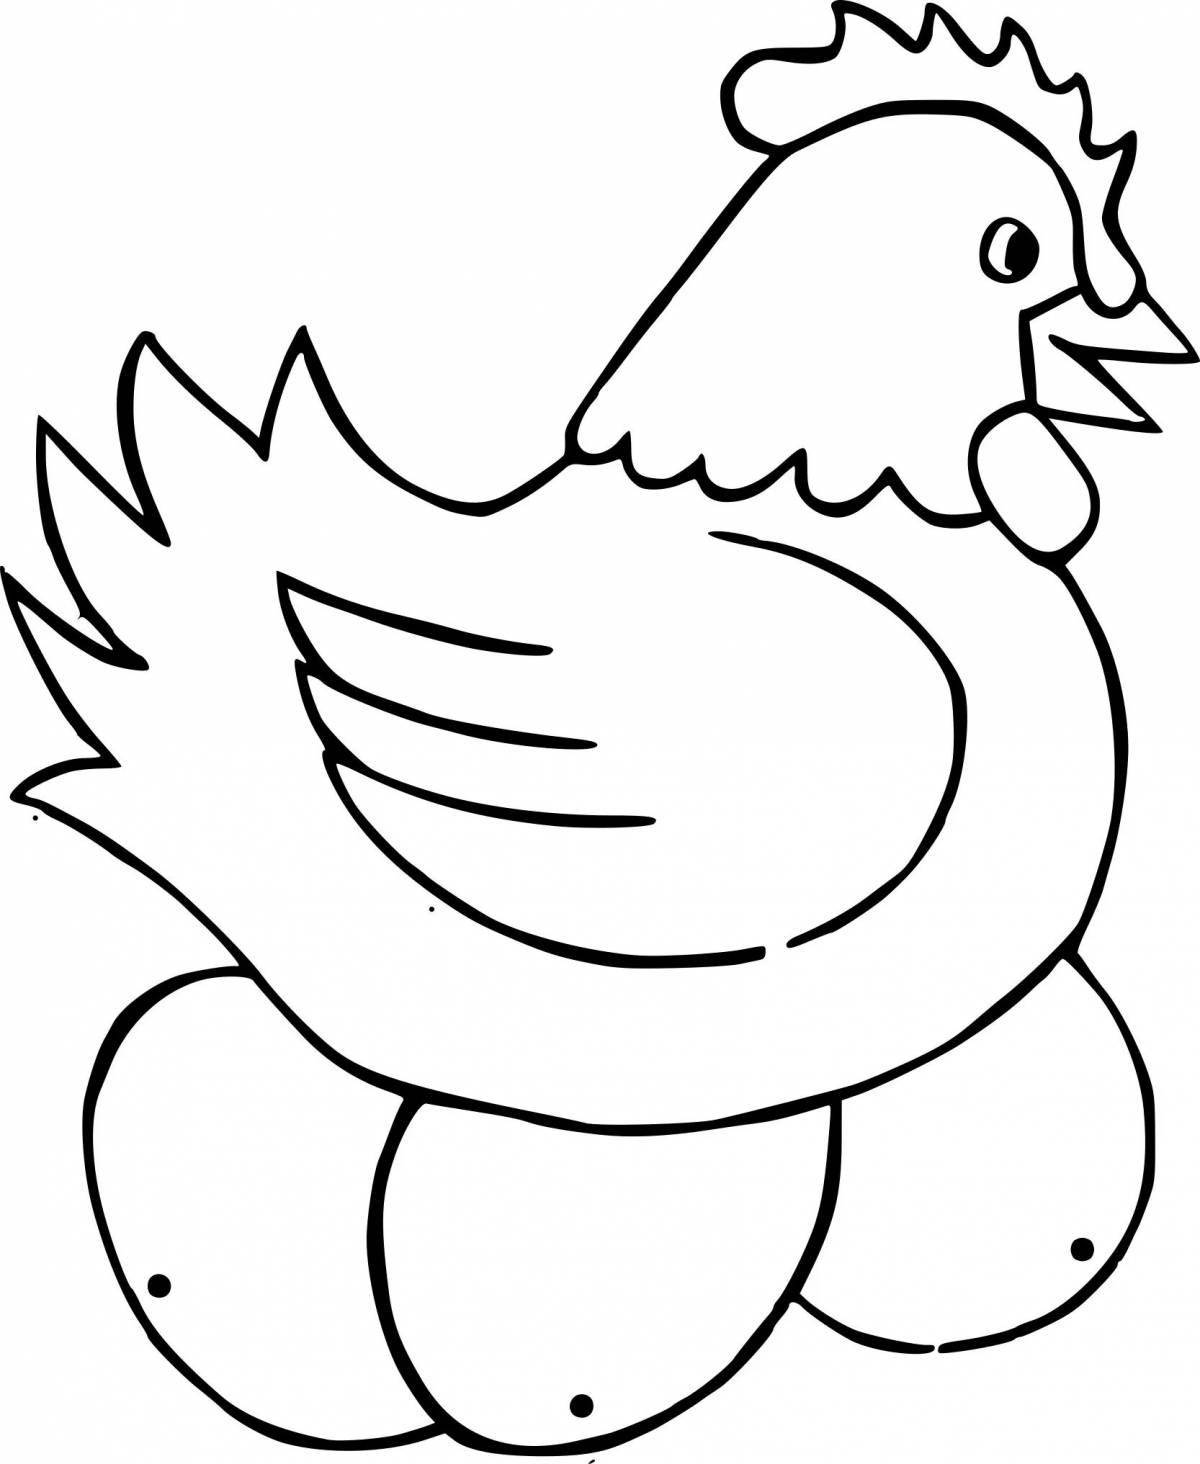 Coloring book magic hen pockmarked for kids